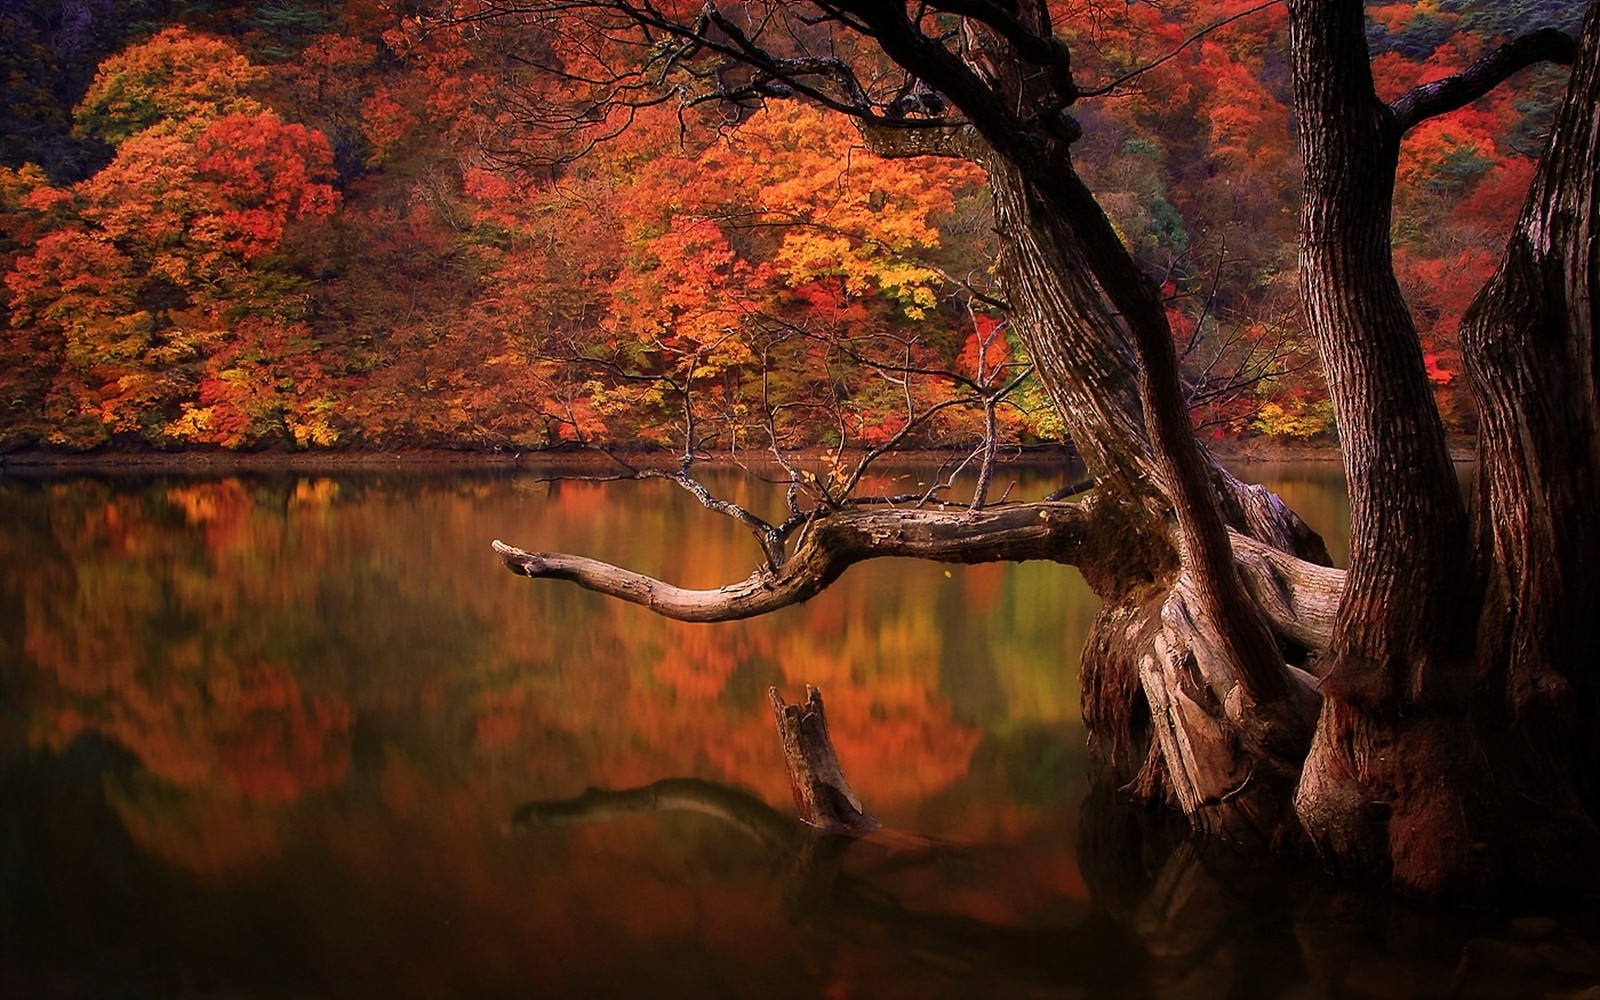 lake, Fall, Forest, Dead Trees, Reflection, Nature, South Korea, Landscape, Colorful, Trees, Water, Sad, Sadness Wallpaper